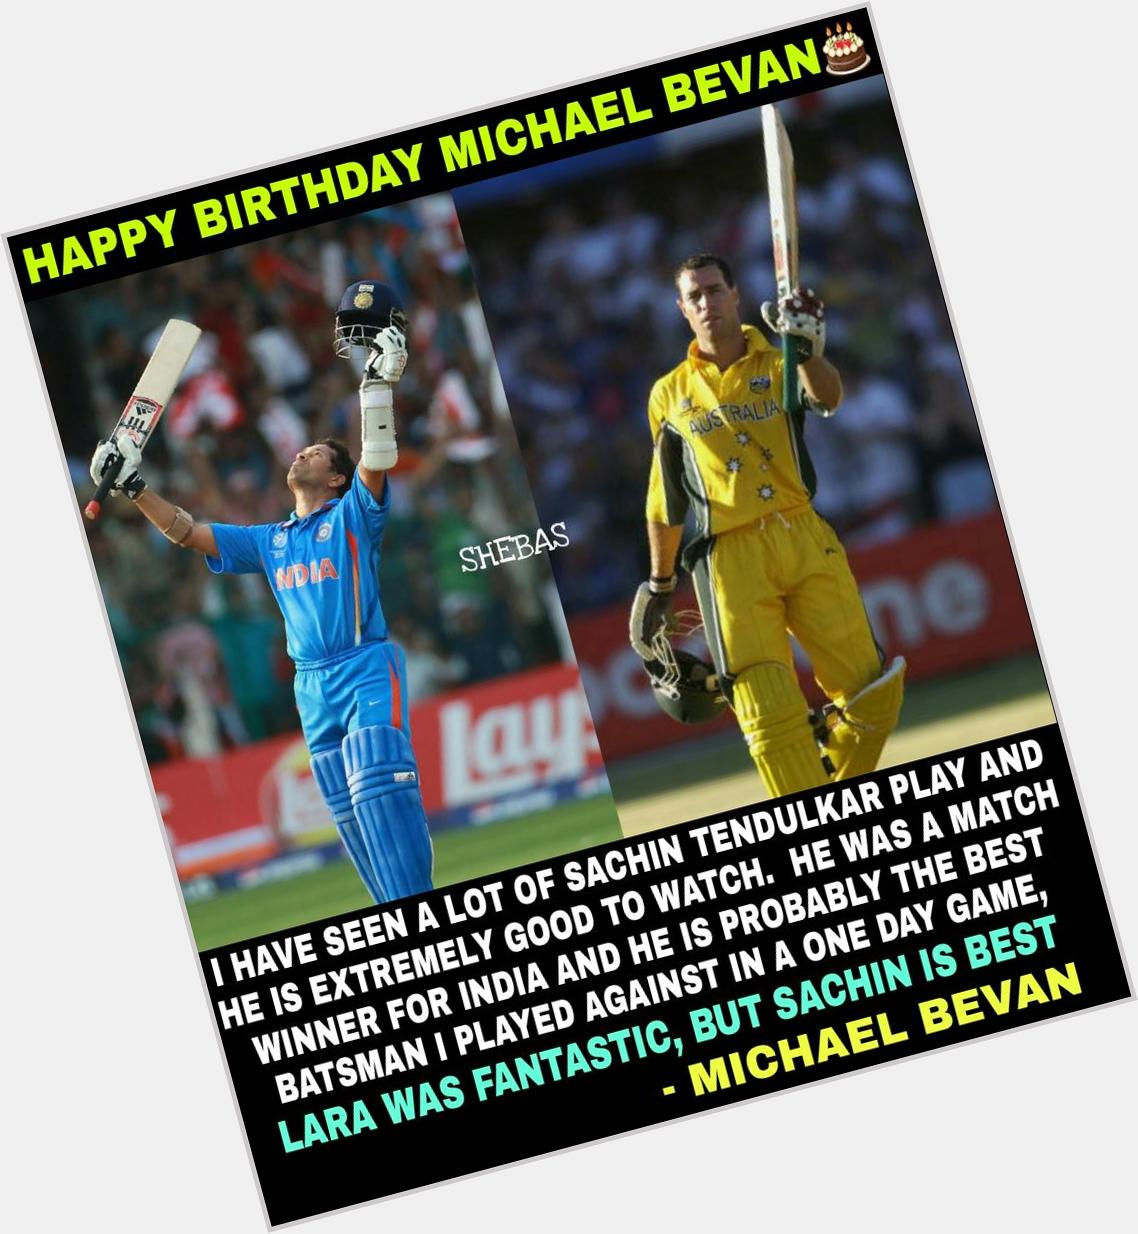 Happy Birthday Michael Bevan  (One Of The Greatest Finisher) 